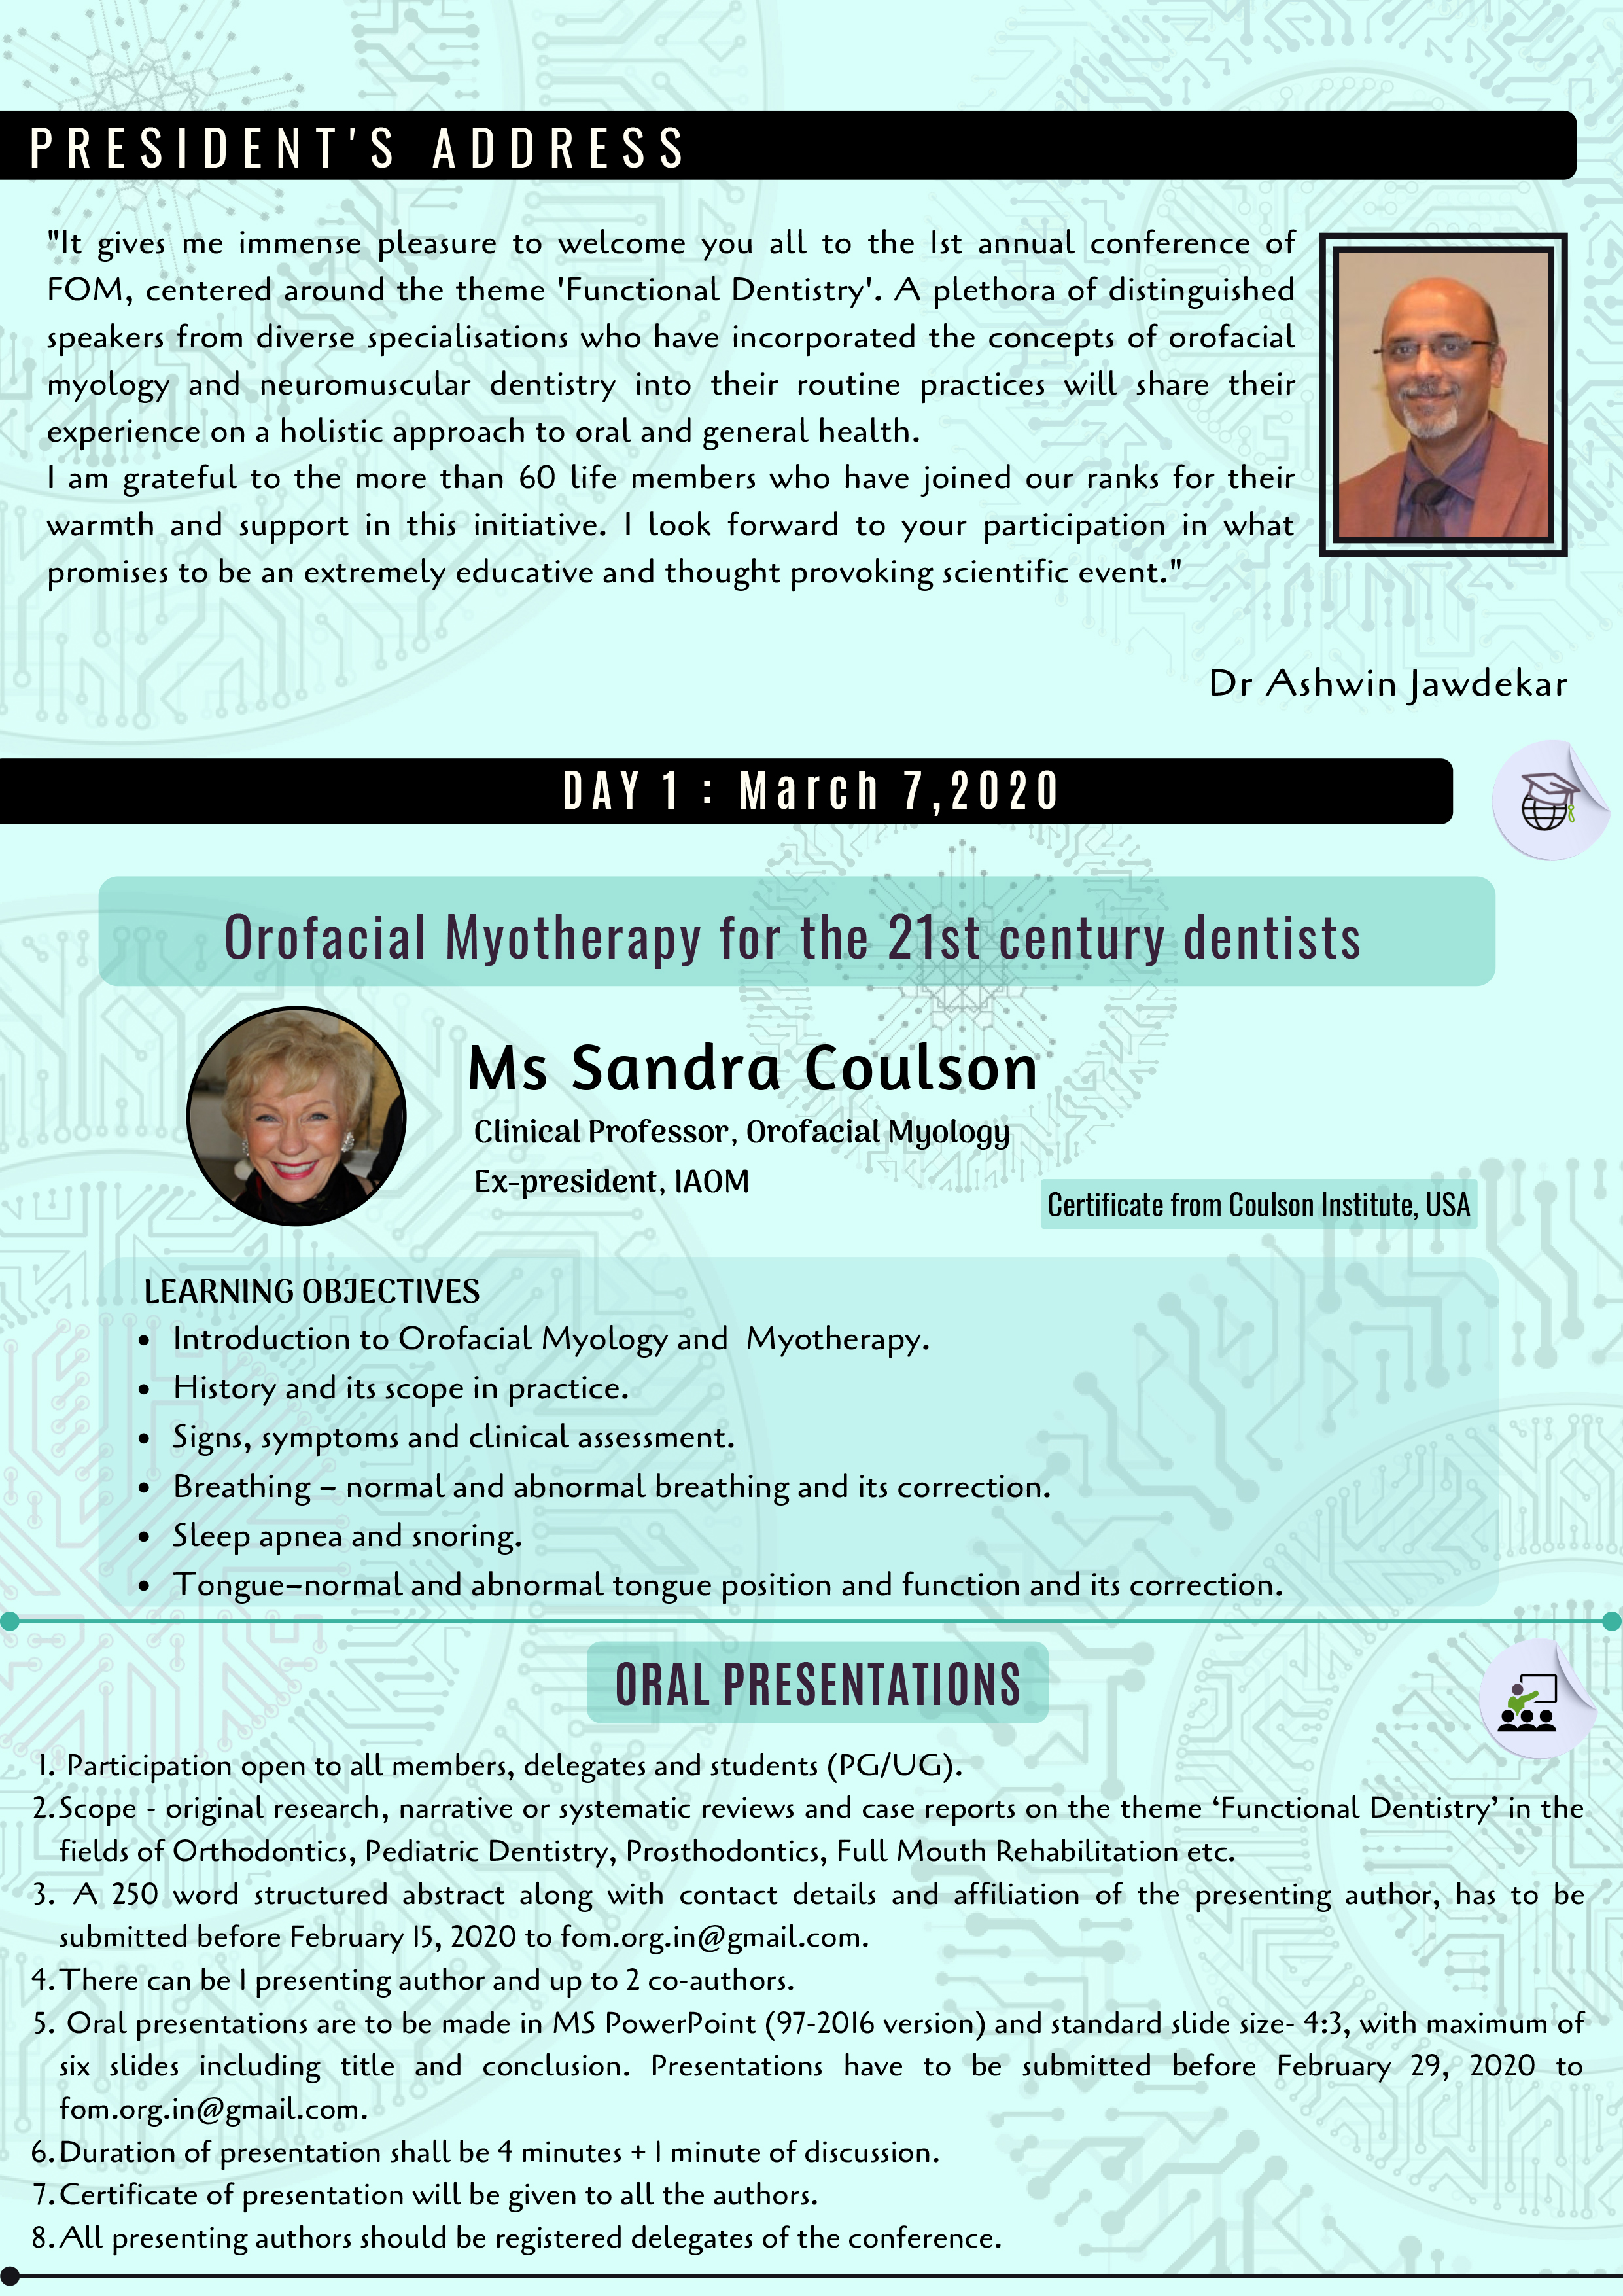 Functional Dentistry: The 1st Conference of its kind in India 